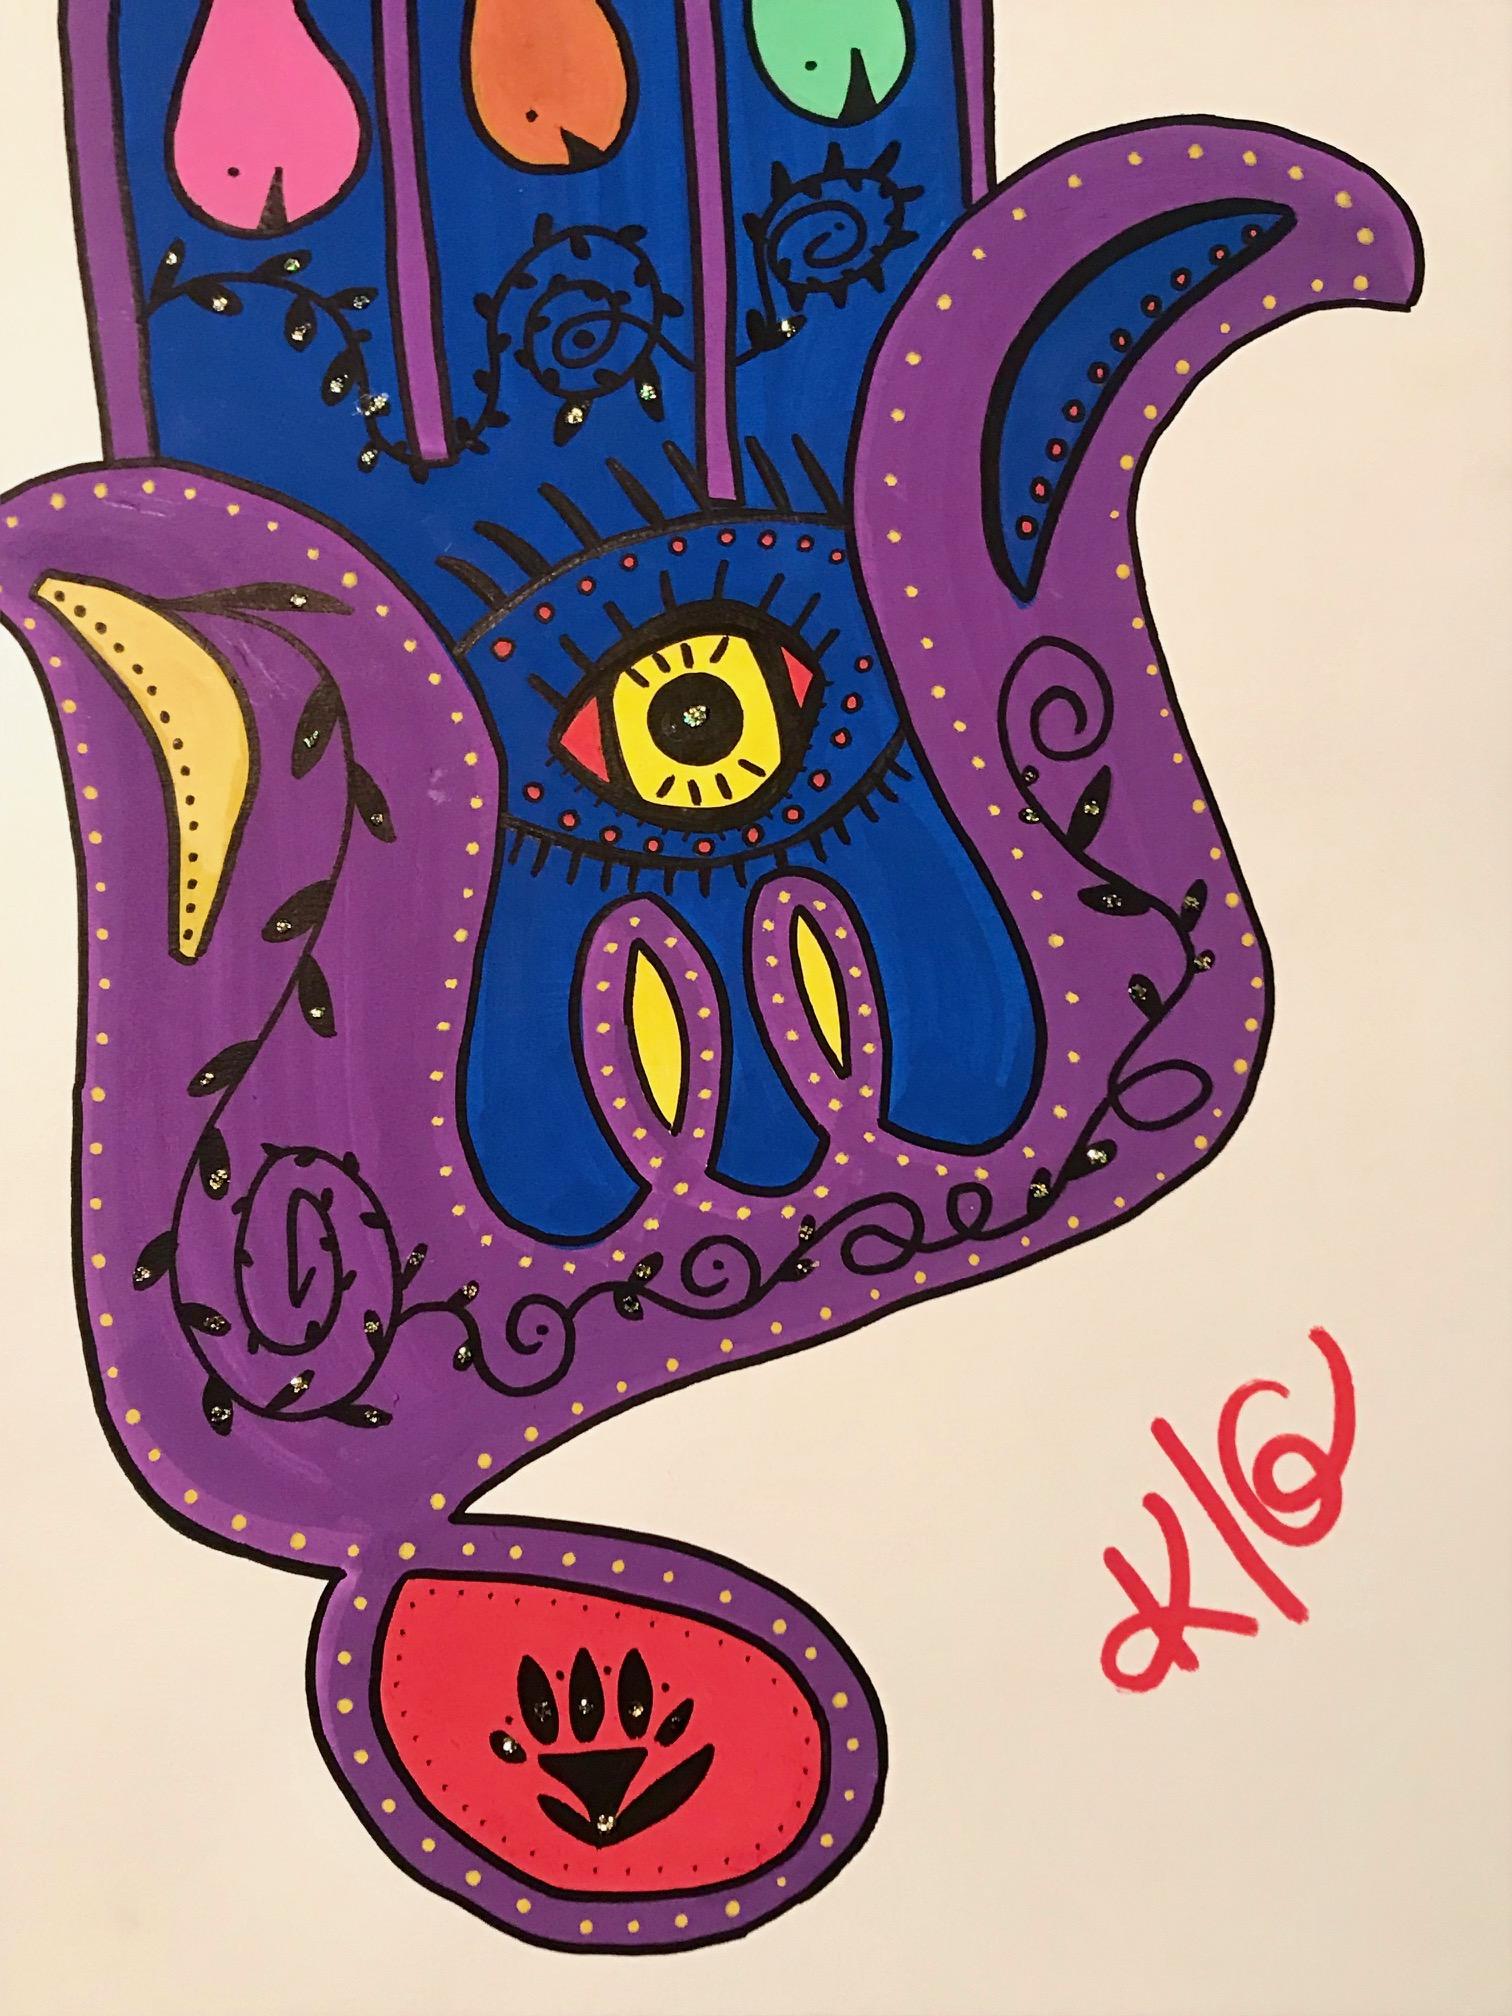 Hamsa and fishes - Art by KLG